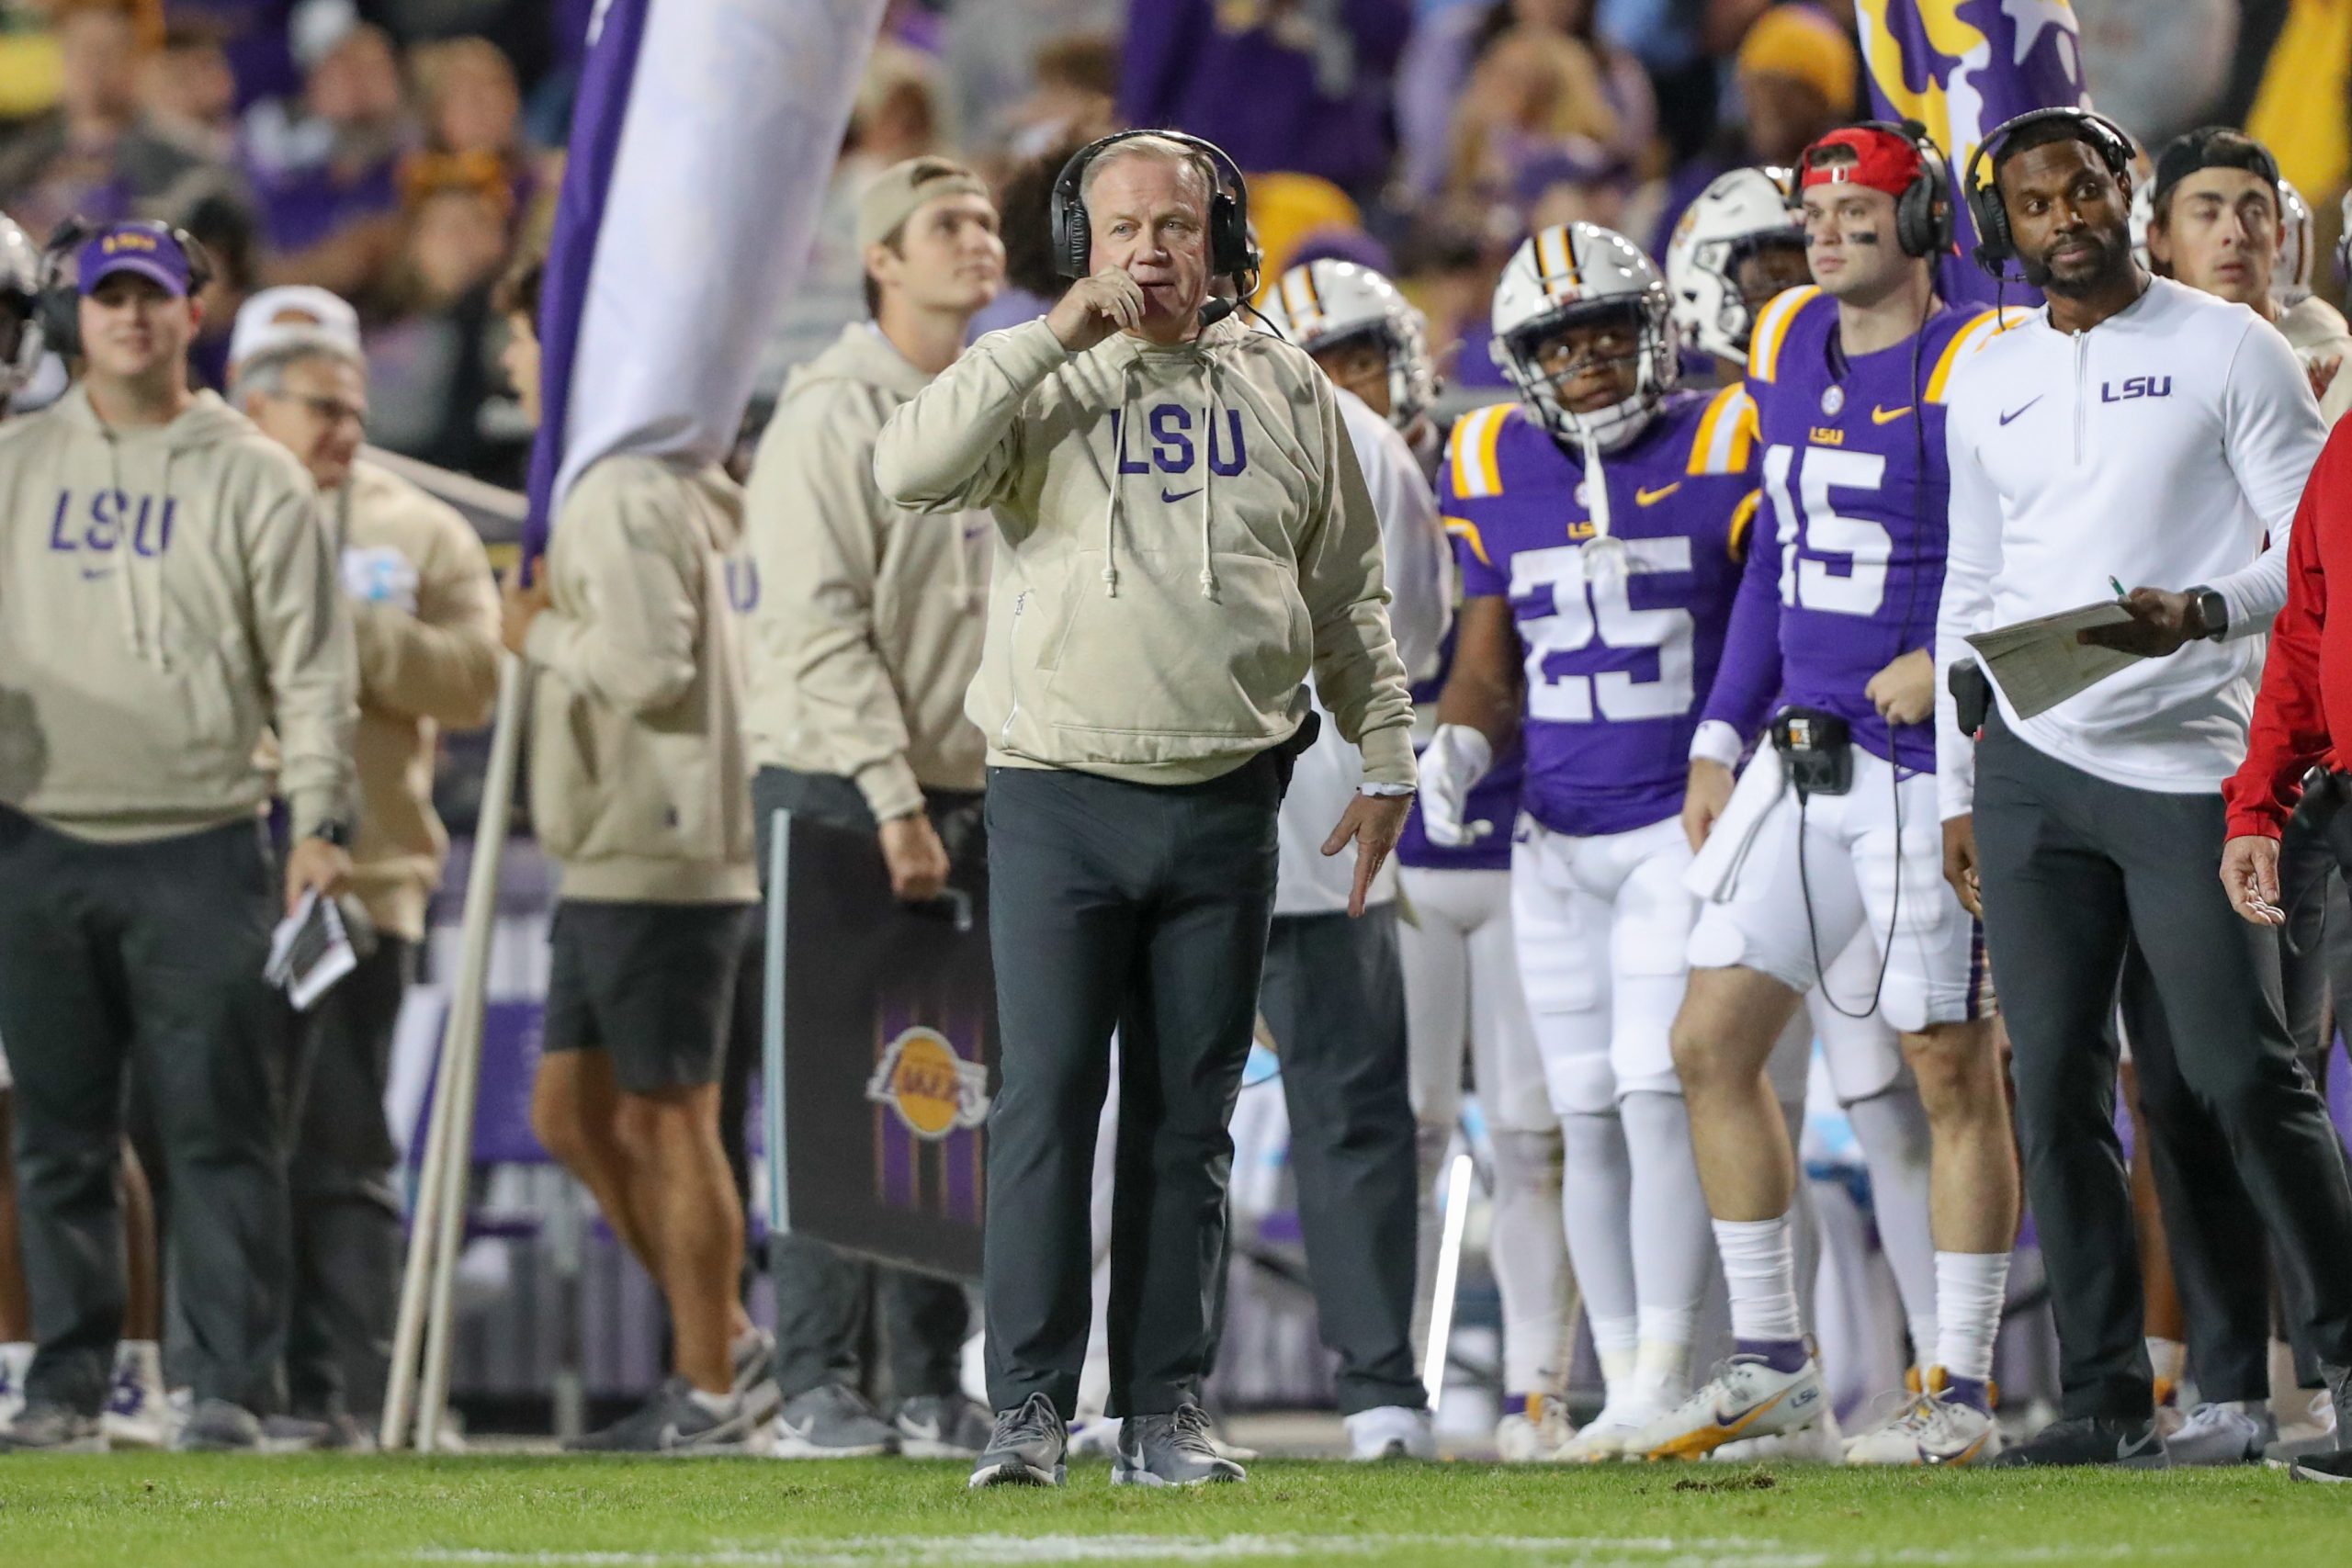 This is where I want to be': LSU coach Brian Kelly vows to finish